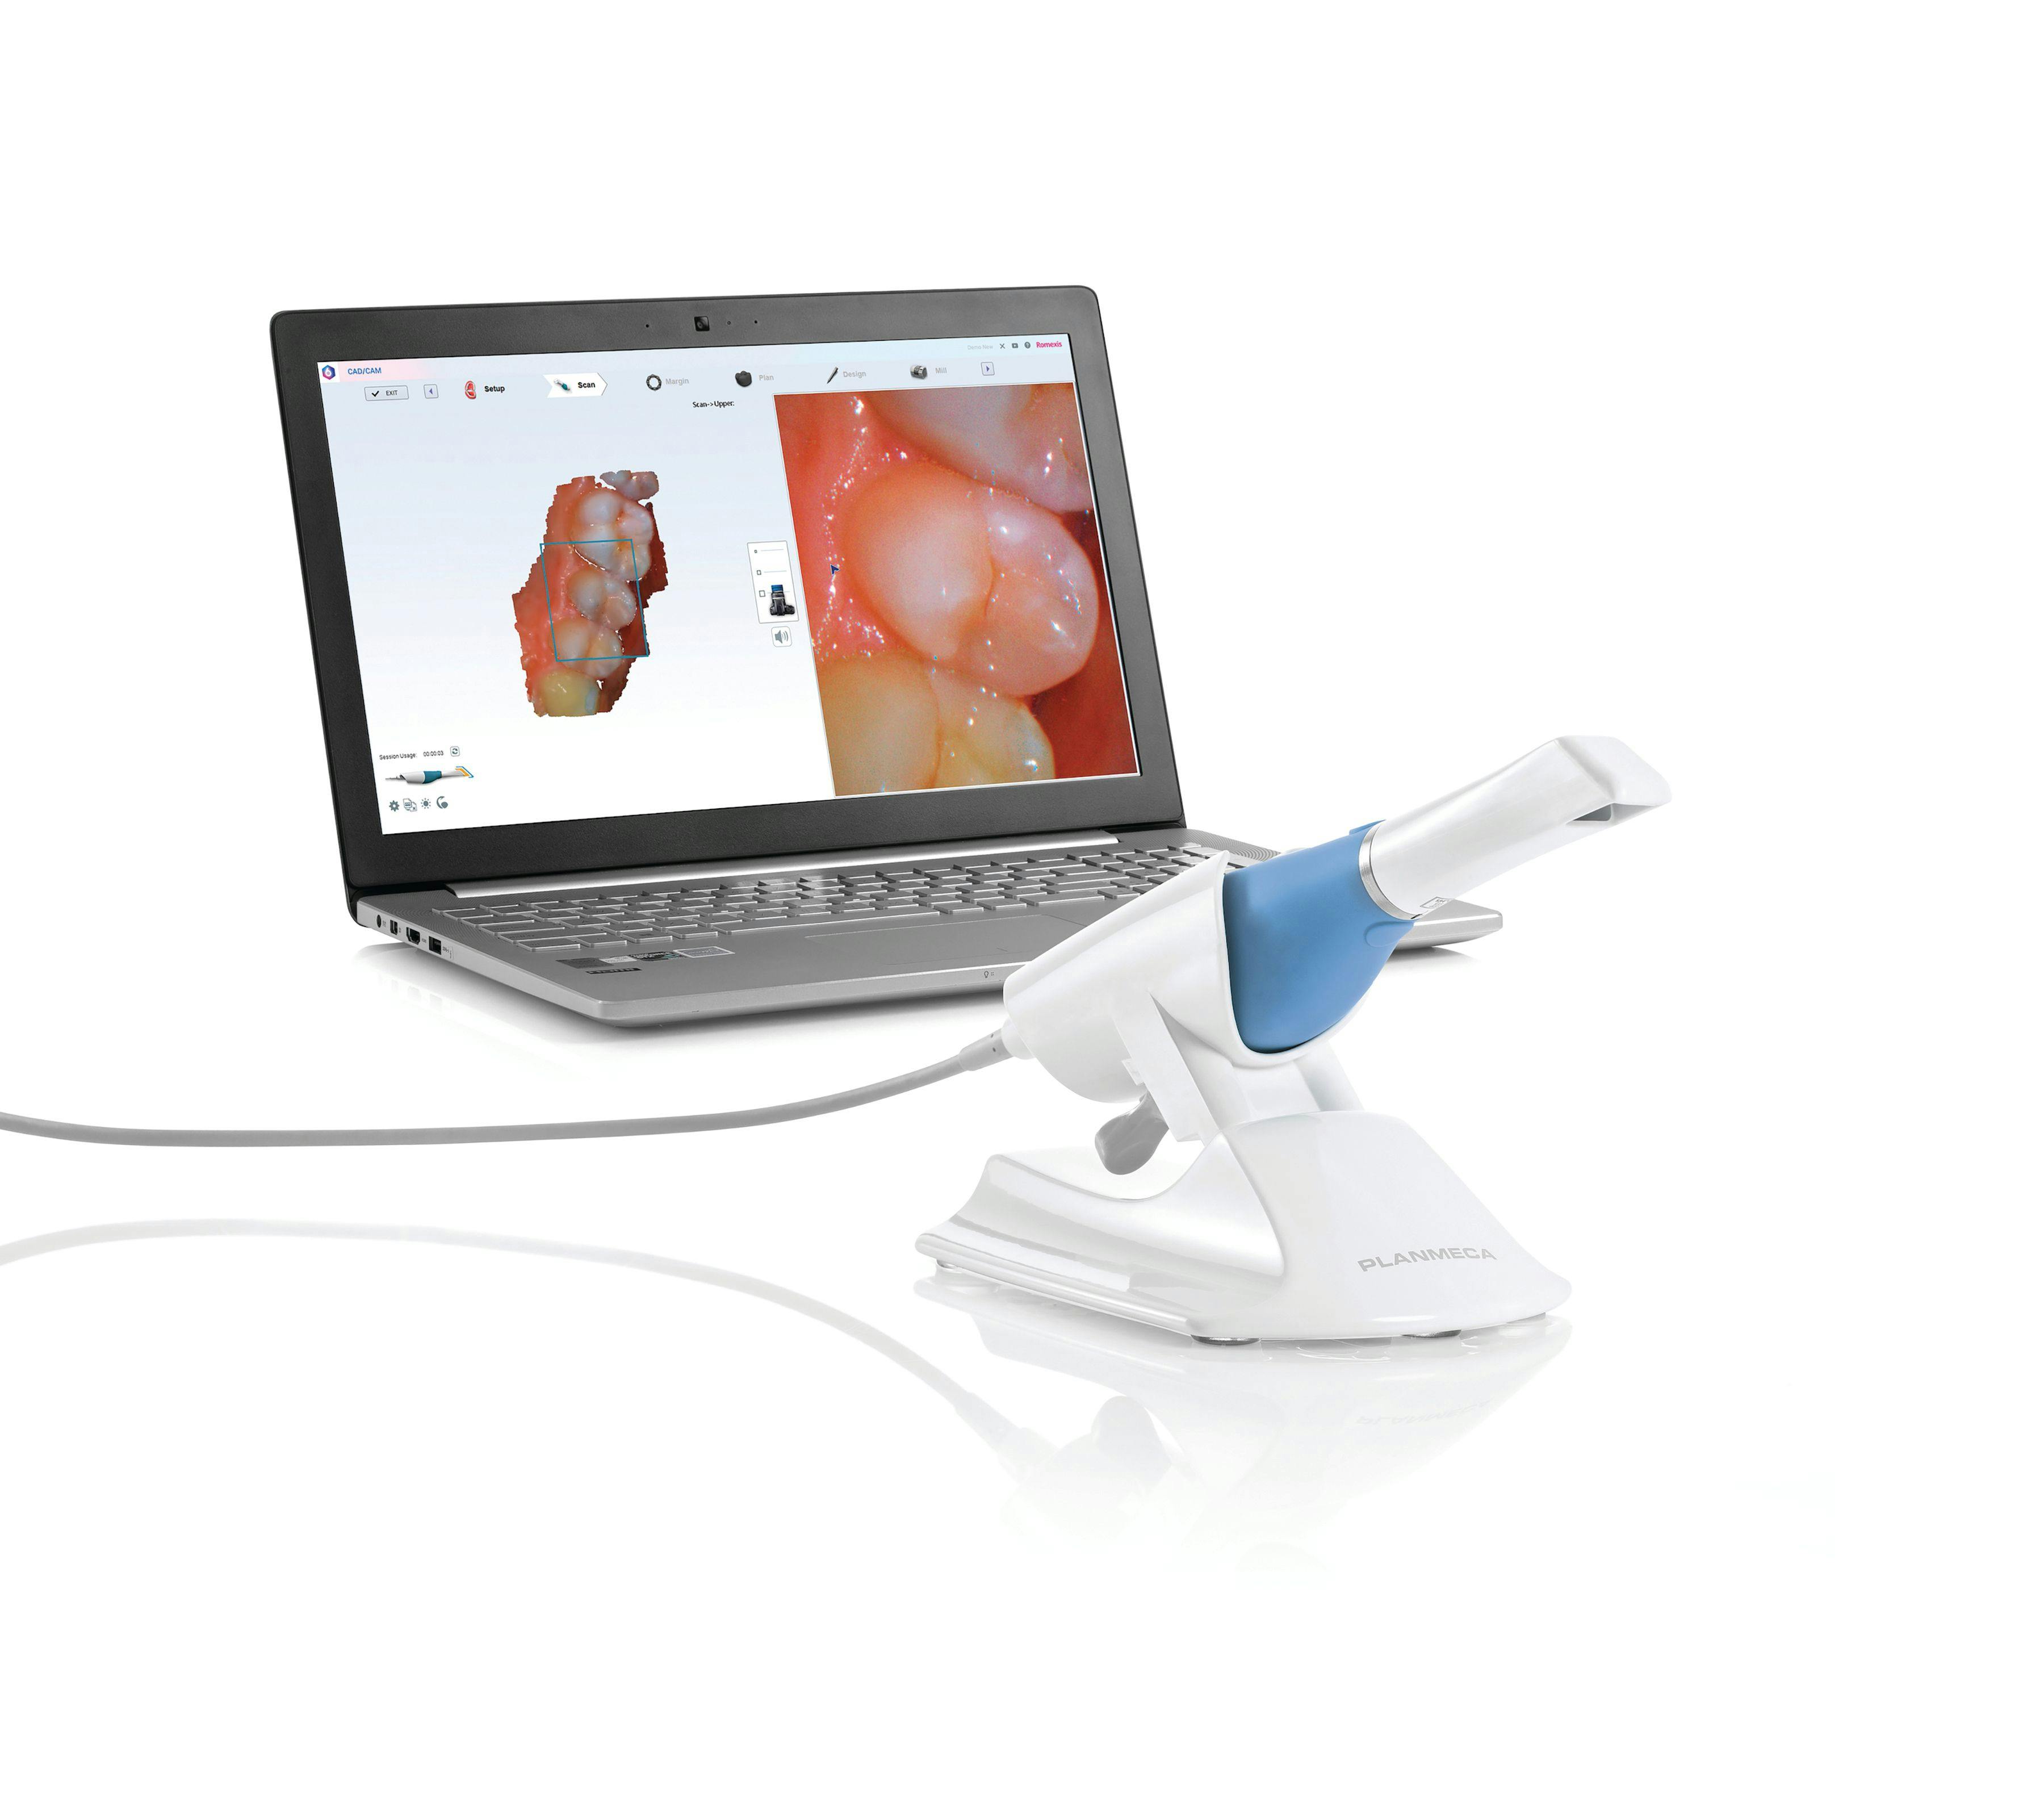 Planmeca’s Dental PACS solution can support CAD/CAM as well as standard 3D formats.